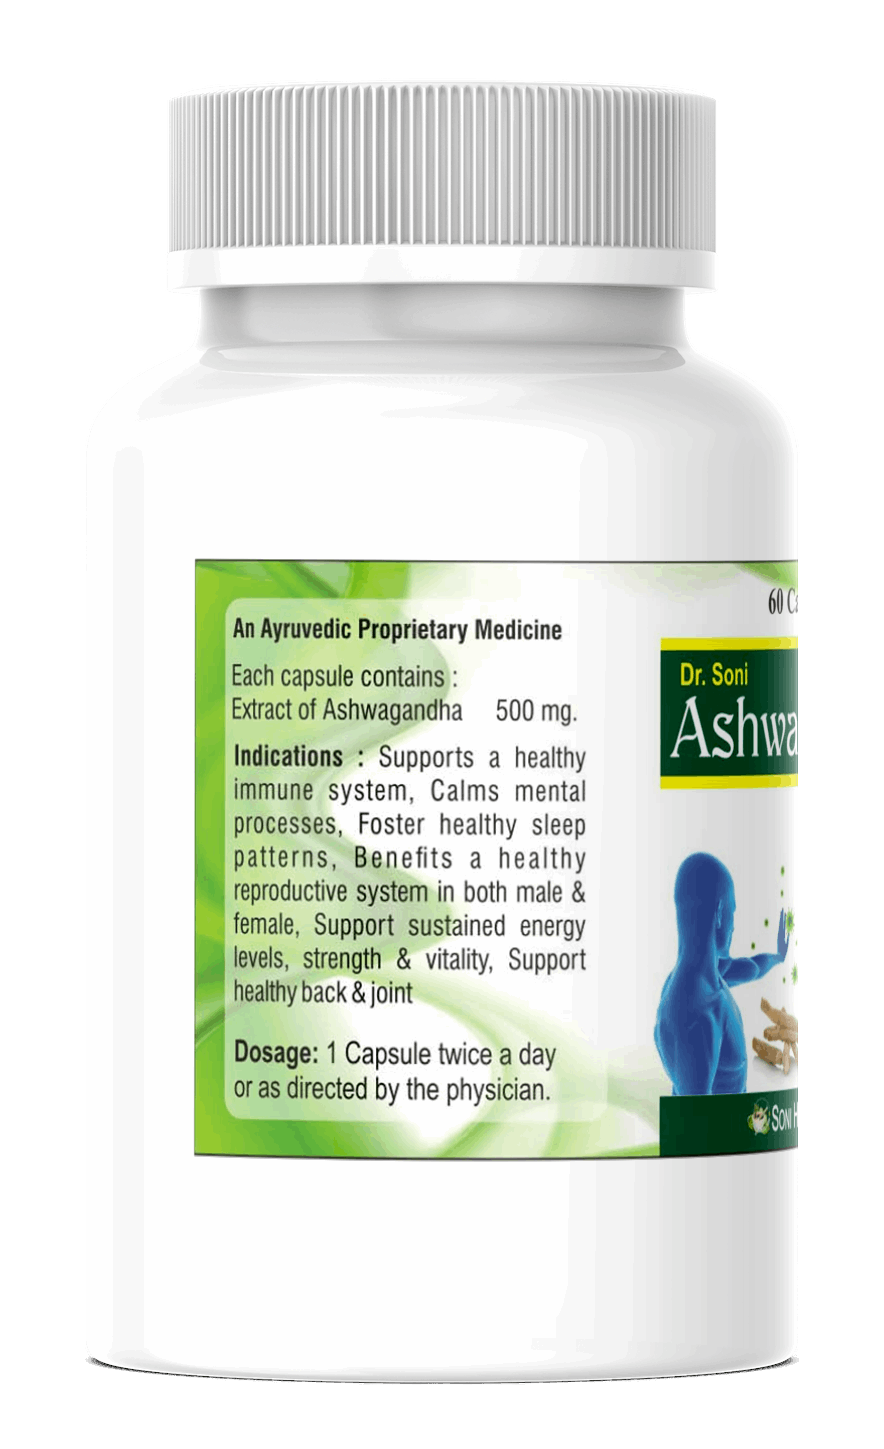 Dr.Soni Ashwagandha Capsules for Improves Muscles Strength, Energy and Immunity Booster,Stress, Ashwagandha Capsules (Pack of 60 Capsules ),Ashwagandha Ayurvedic Capsules